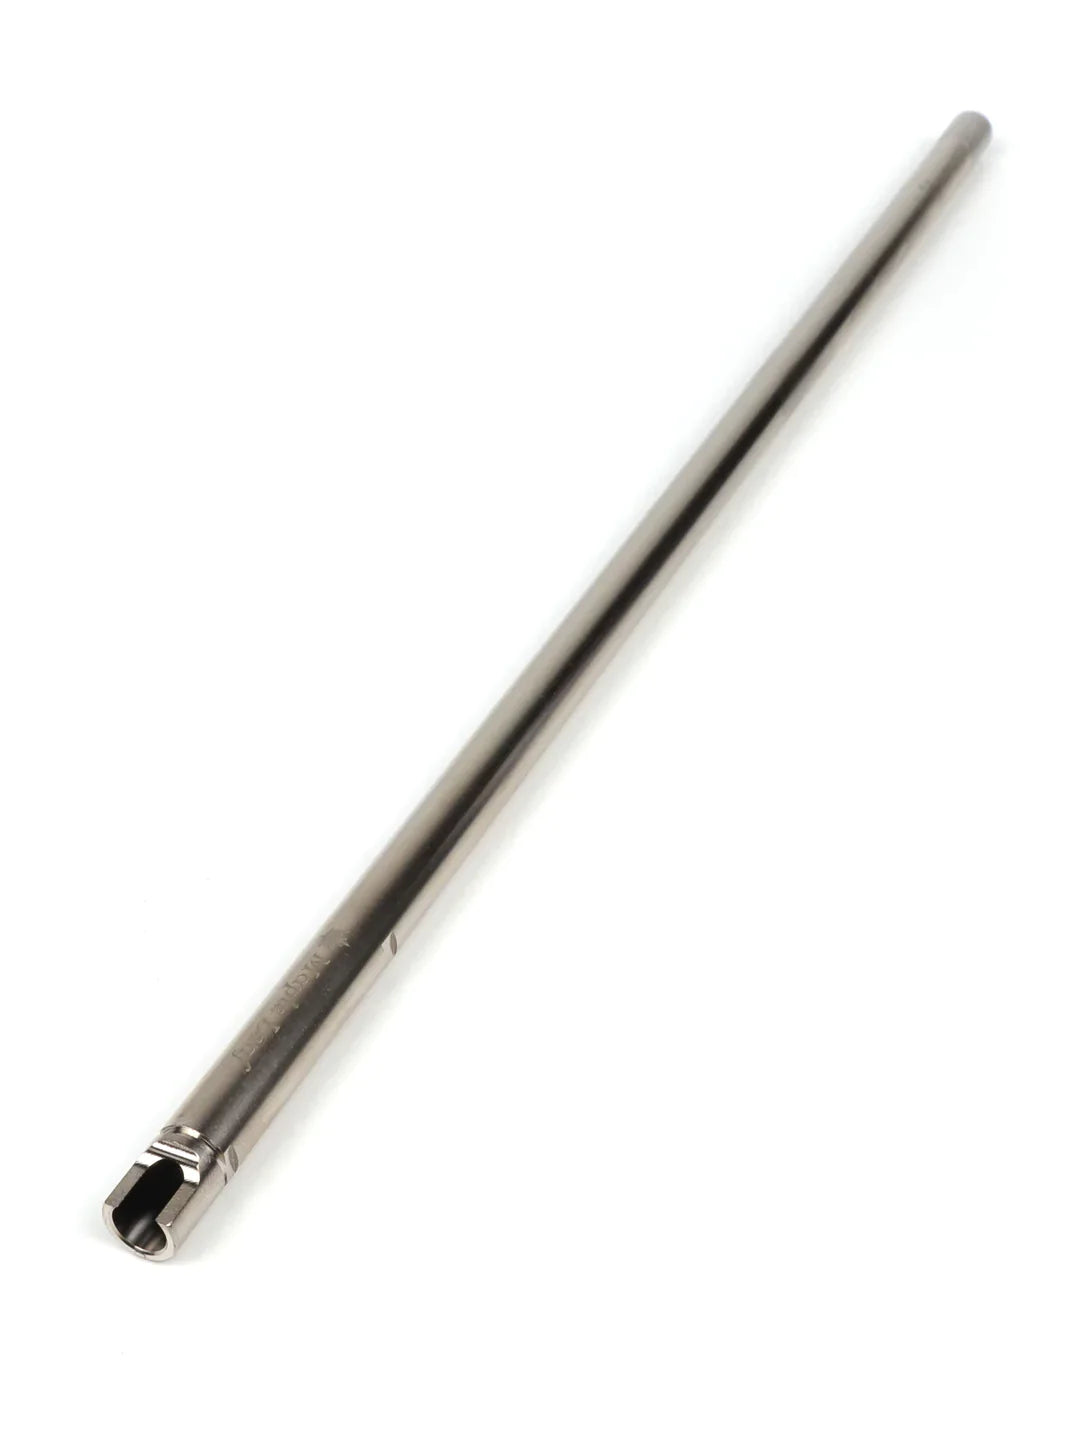 Maple Leaf Crazy Jet 6.01mm Tight Bore Inner Barrel for GBB Rifles - ssairsoft.com